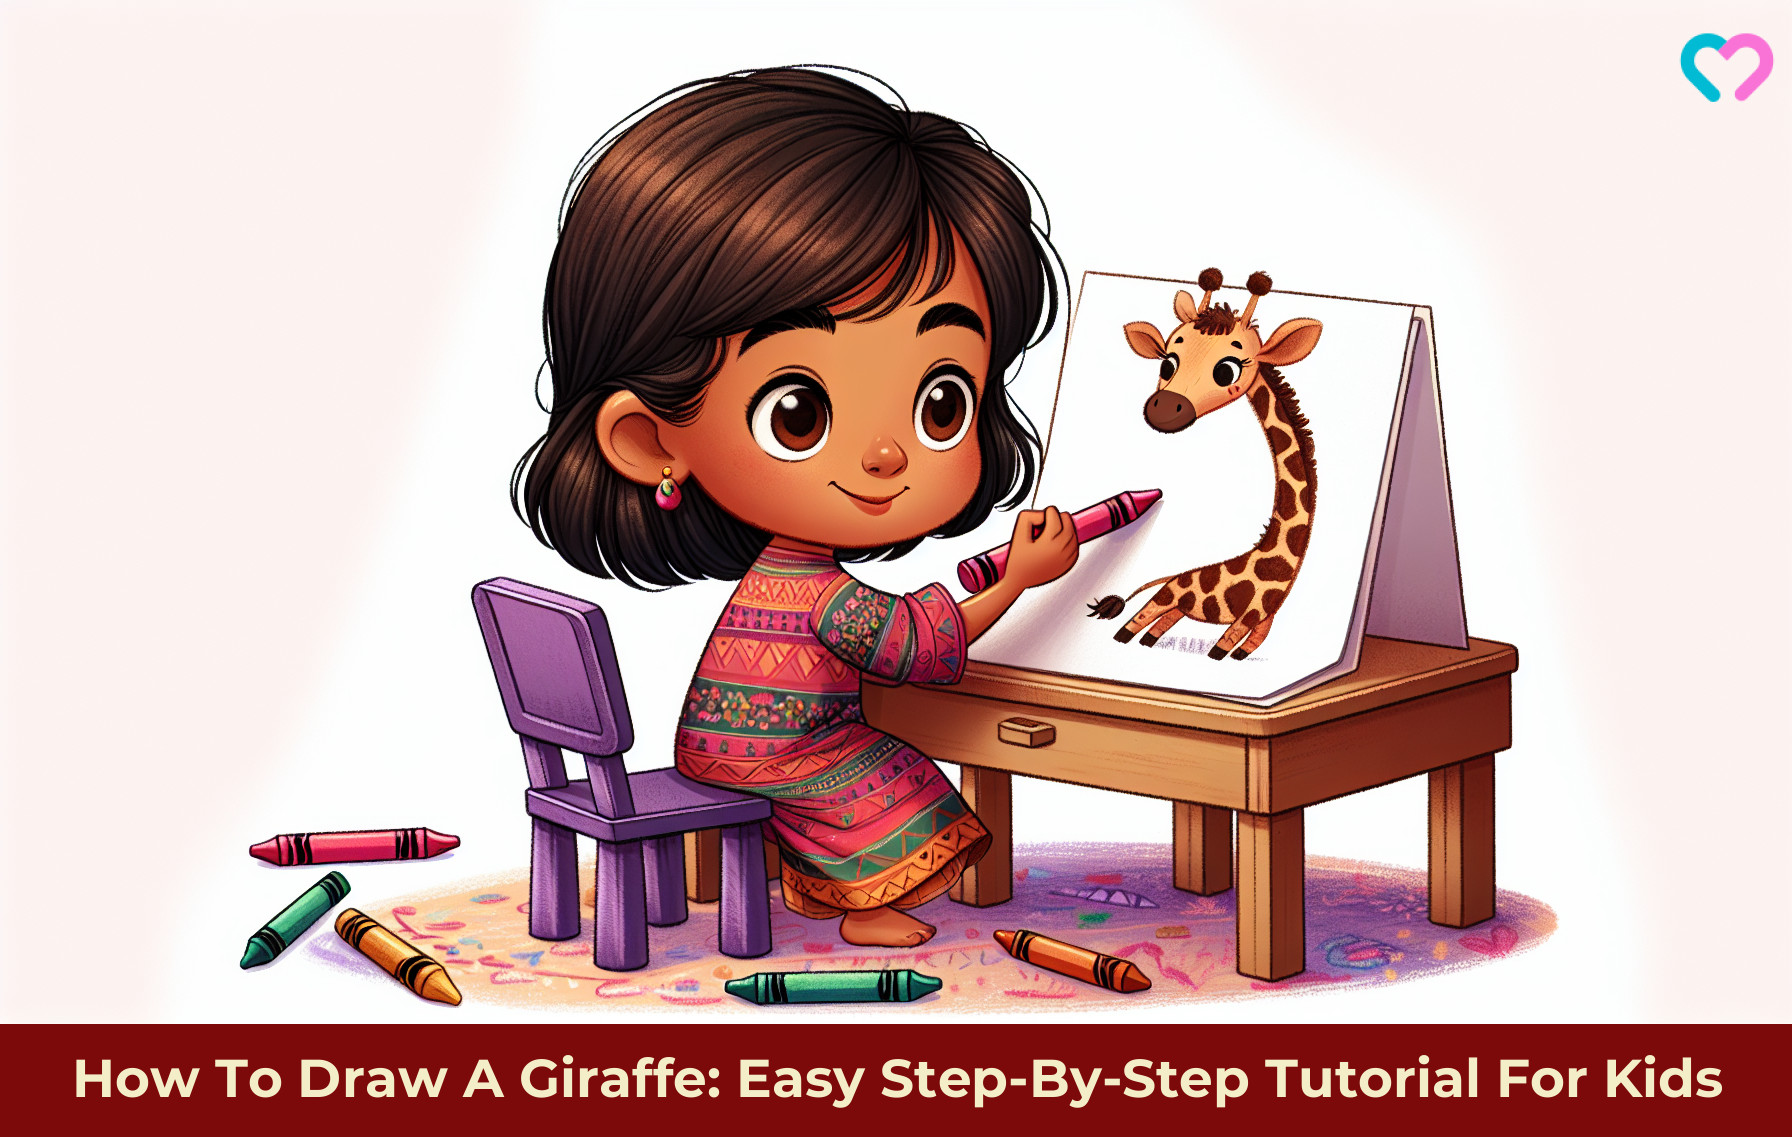 How To Draw A Giraffe_illustration